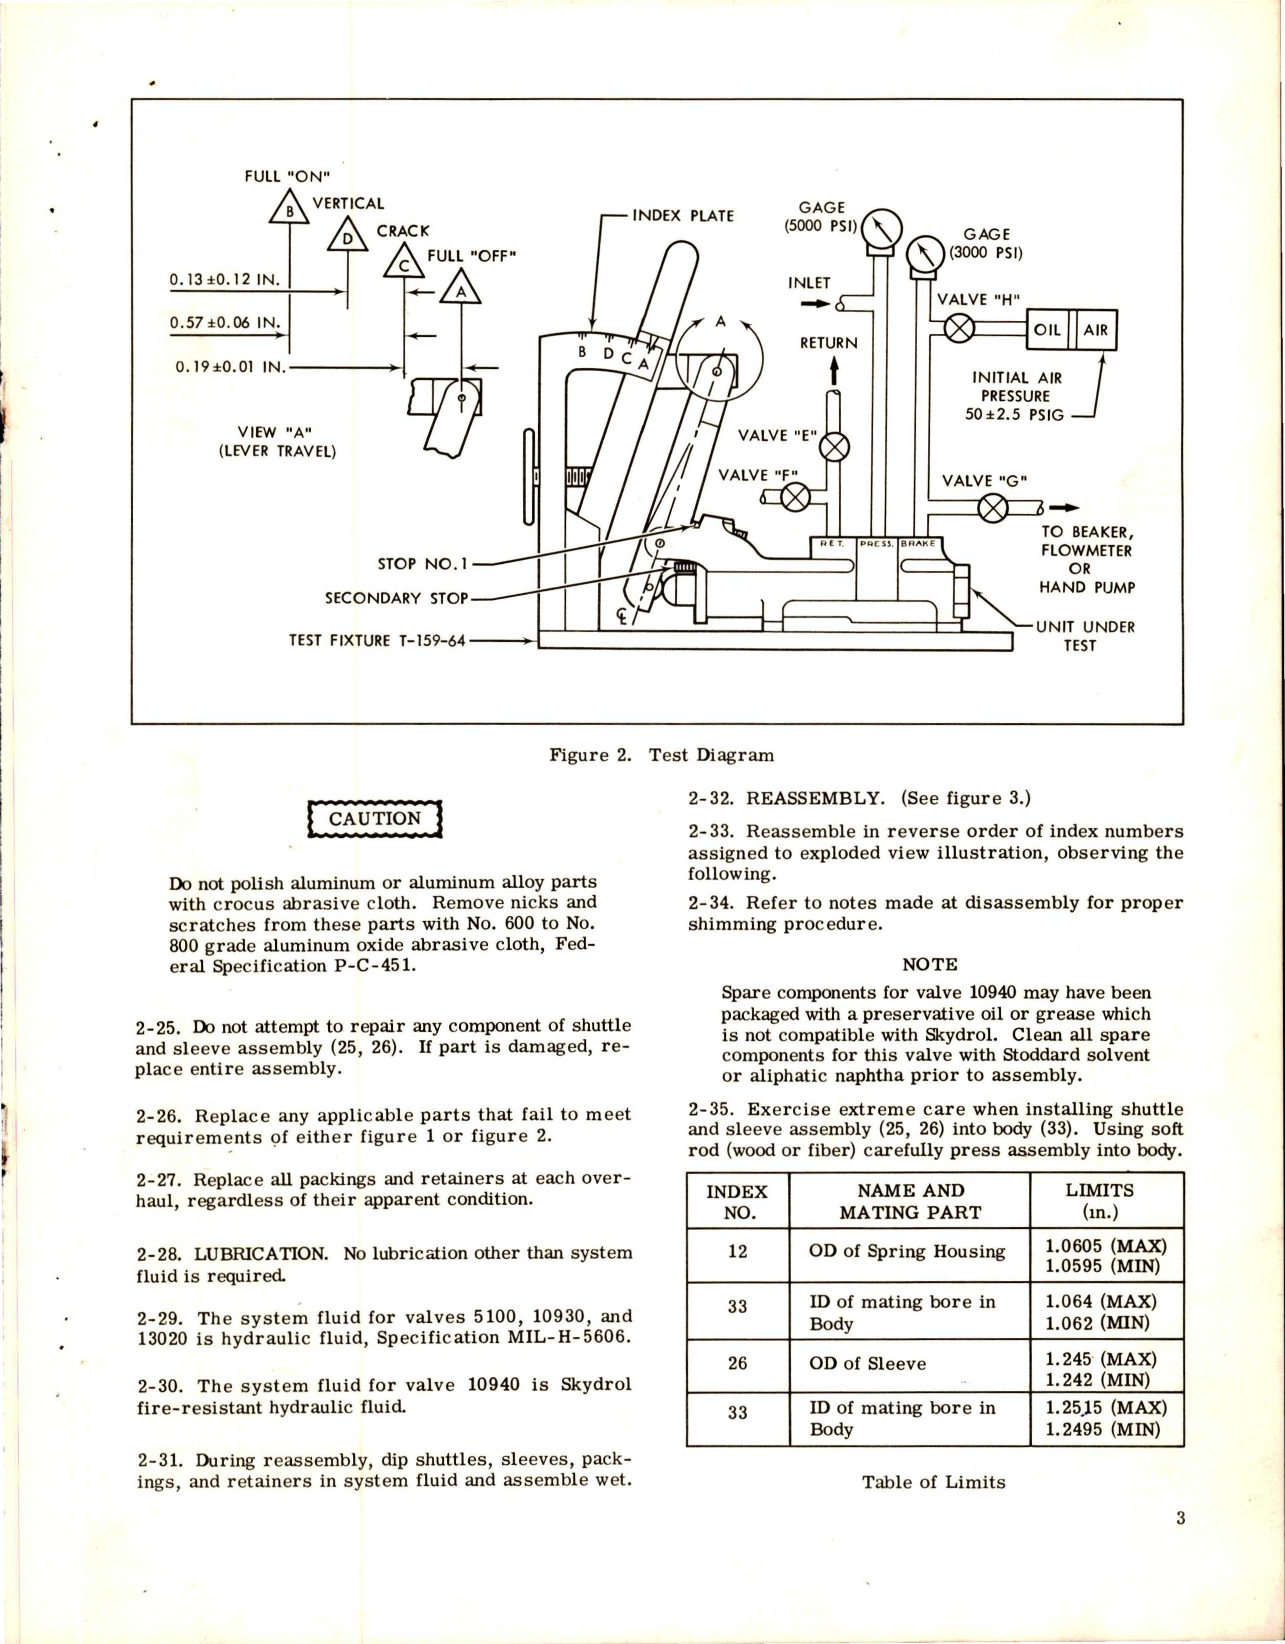 Sample page 5 from AirCorps Library document: Overhaul Instructions with Parts Catalog for Parking Brake Valves - Part 5100, 10930, 10940 and 10320 